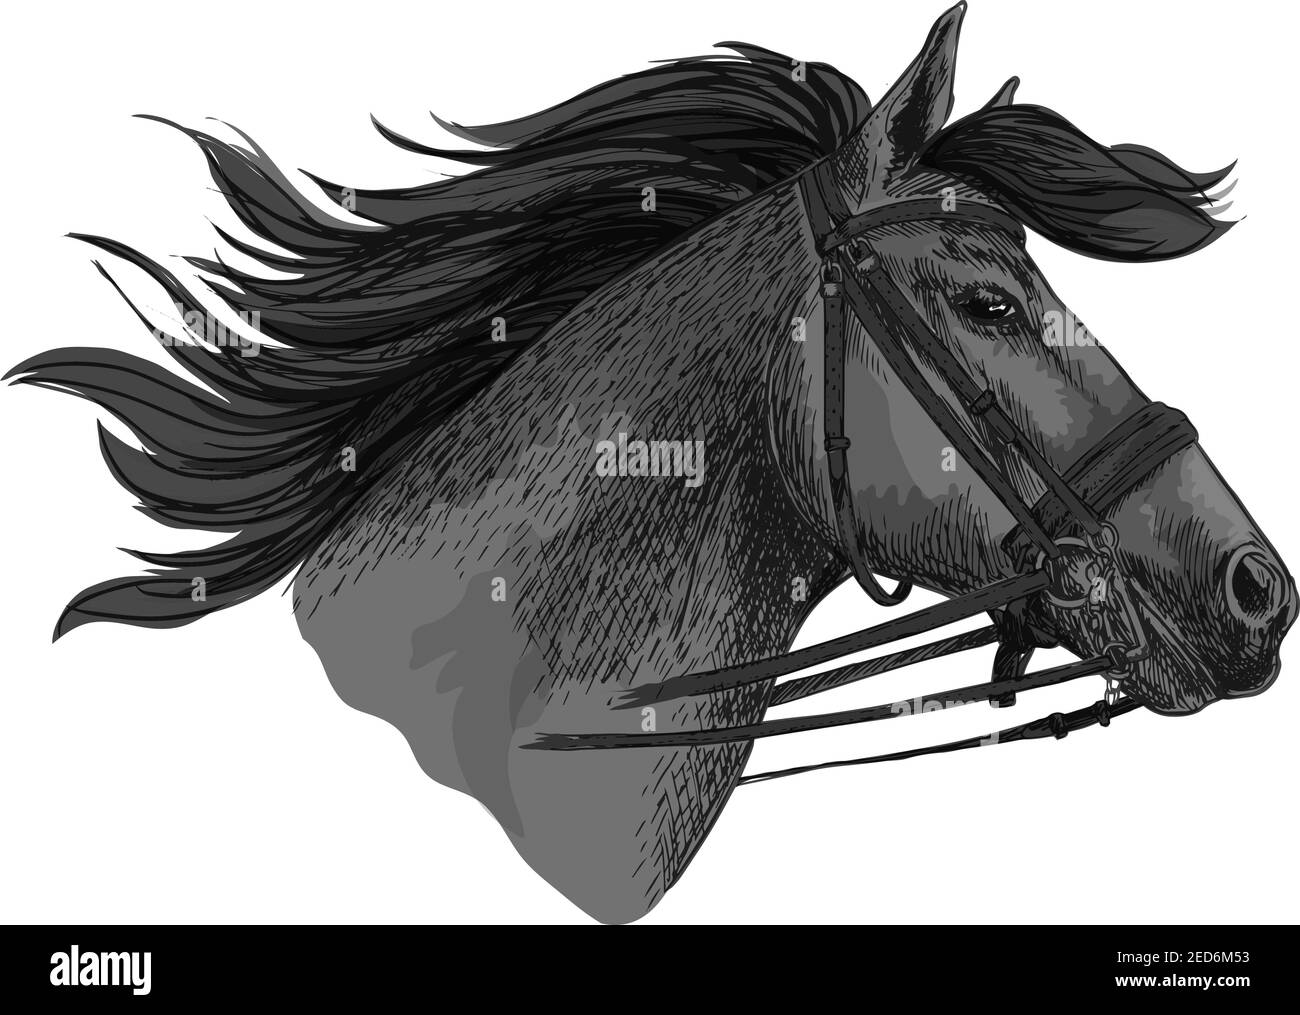 Horse in bridle running on races. Mustang trotter racing vector sketch. Stallion head symbol for sport horserace. equestrian races riding club, equine Stock Vector